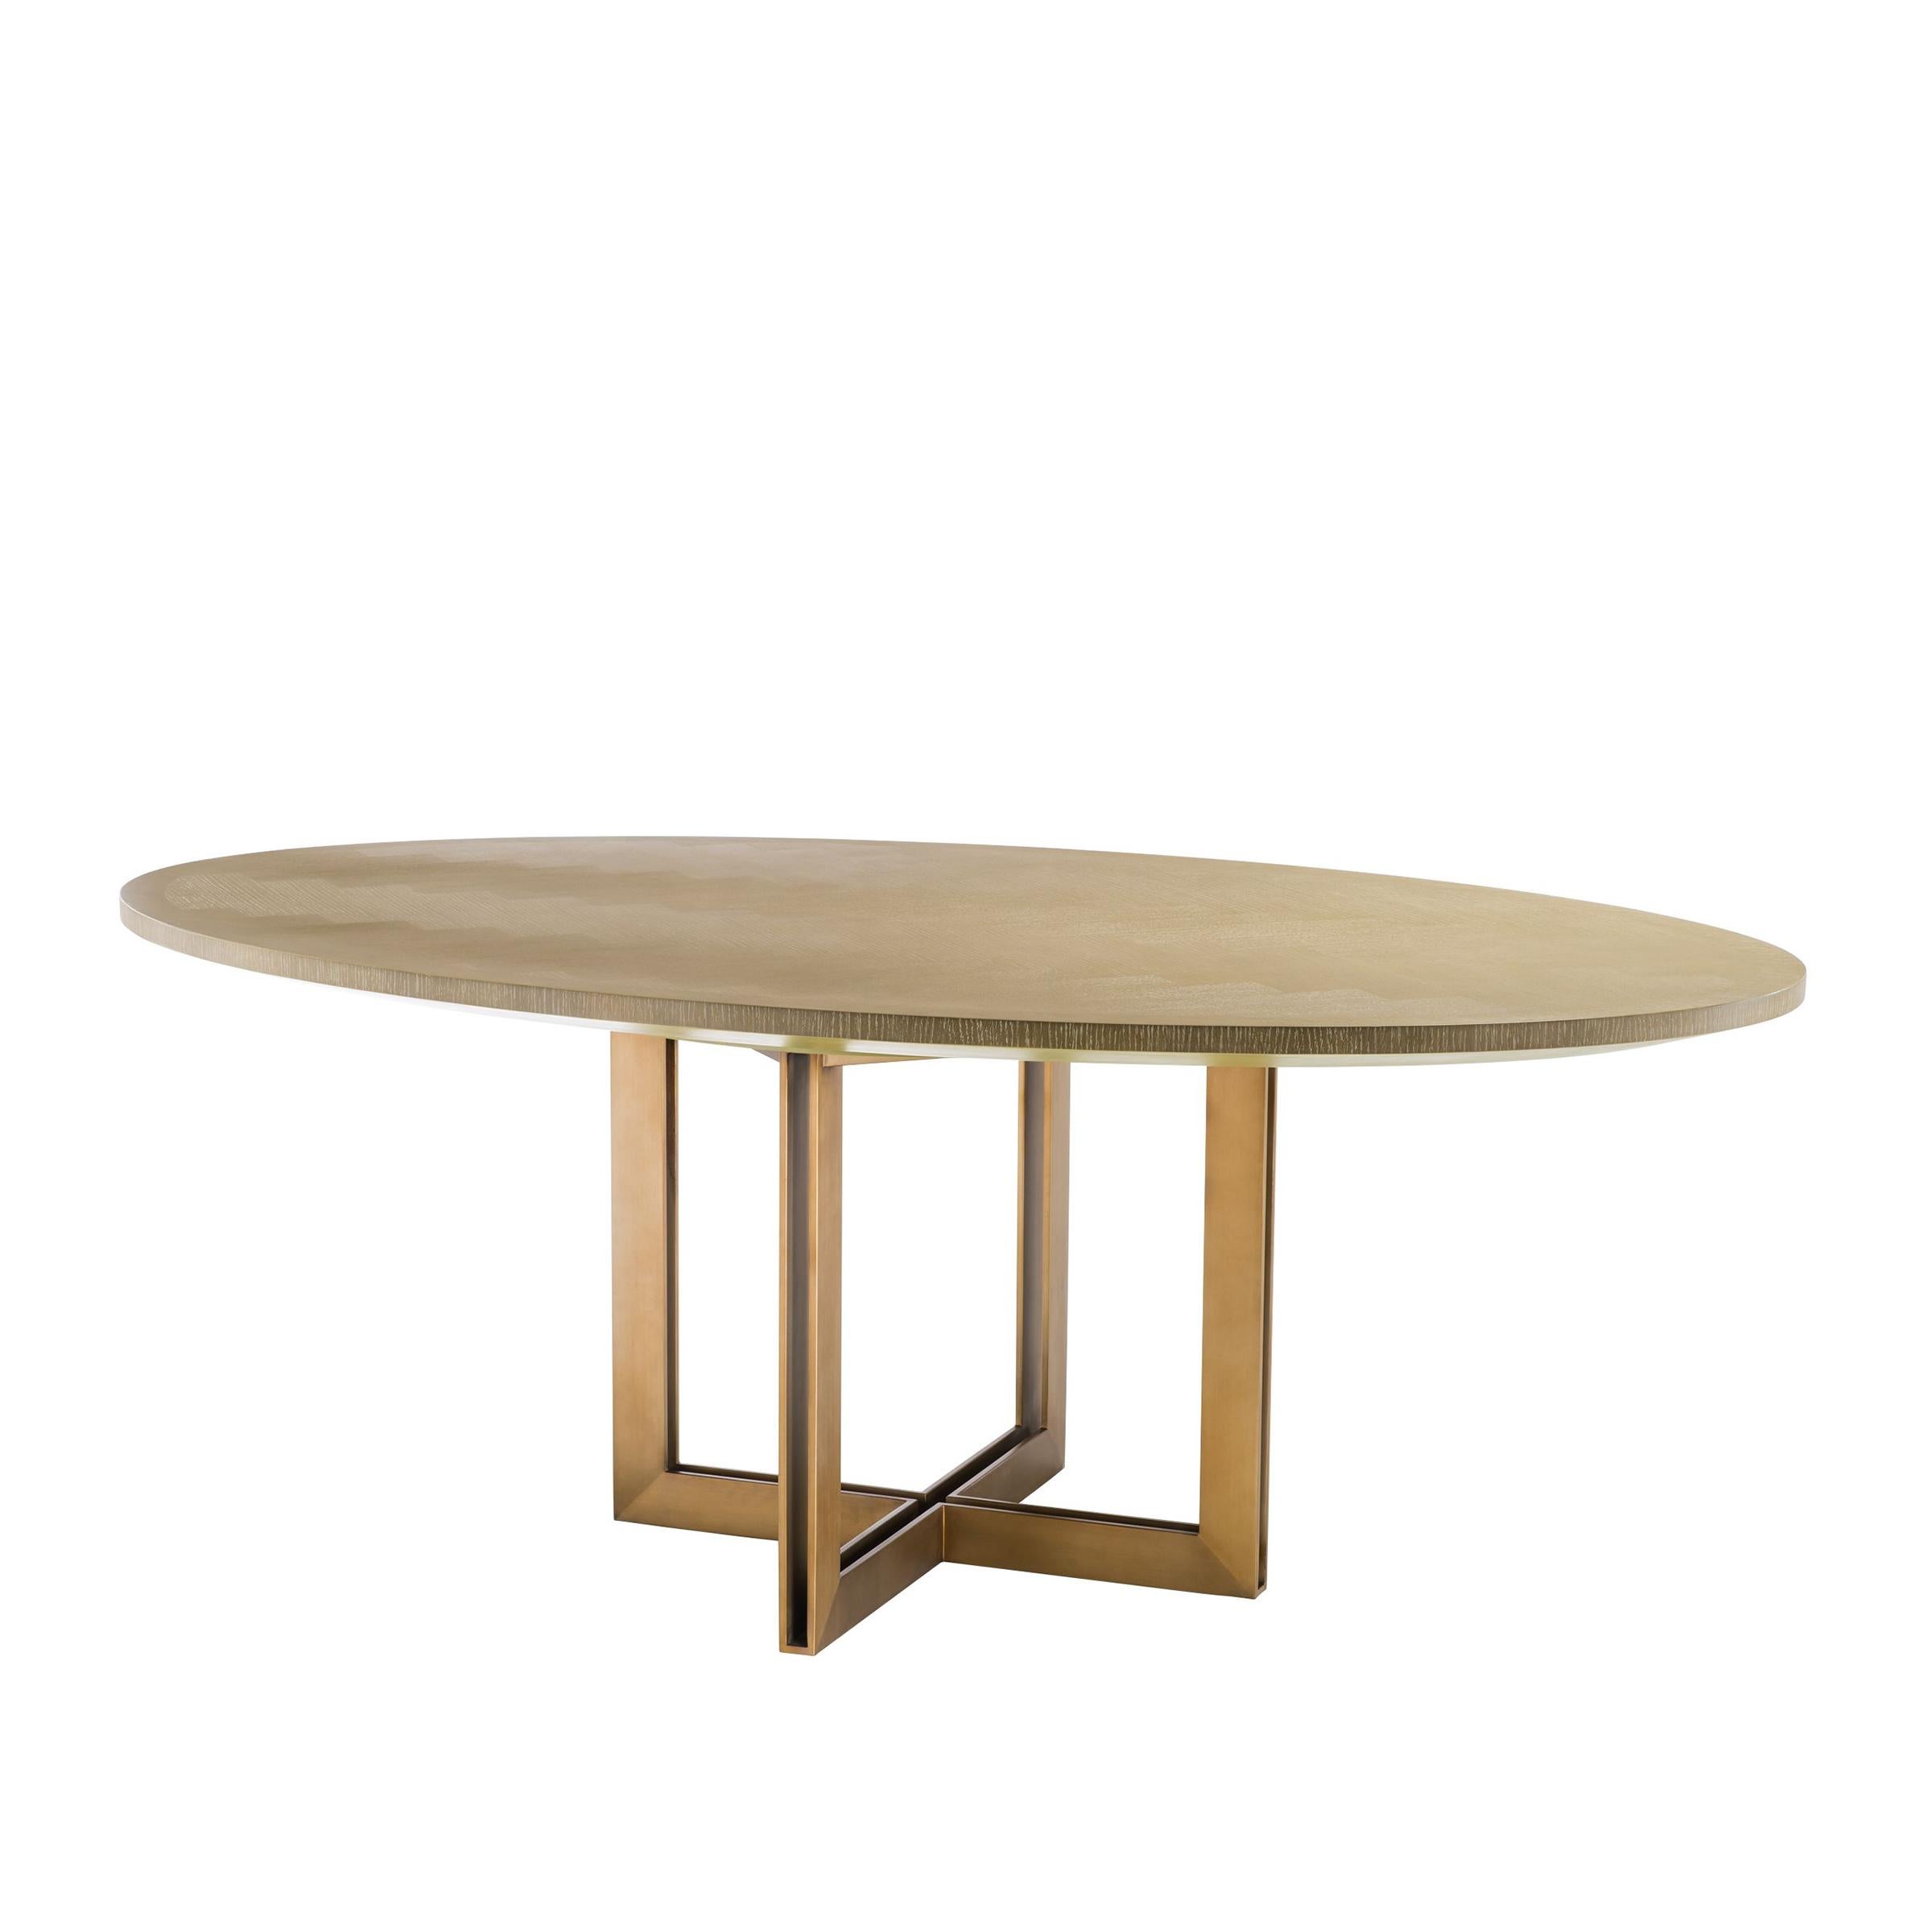 Dining table brass oval with charcoal oak
veneer top. On bronze finish base.
Also available in brass oval black dining table.